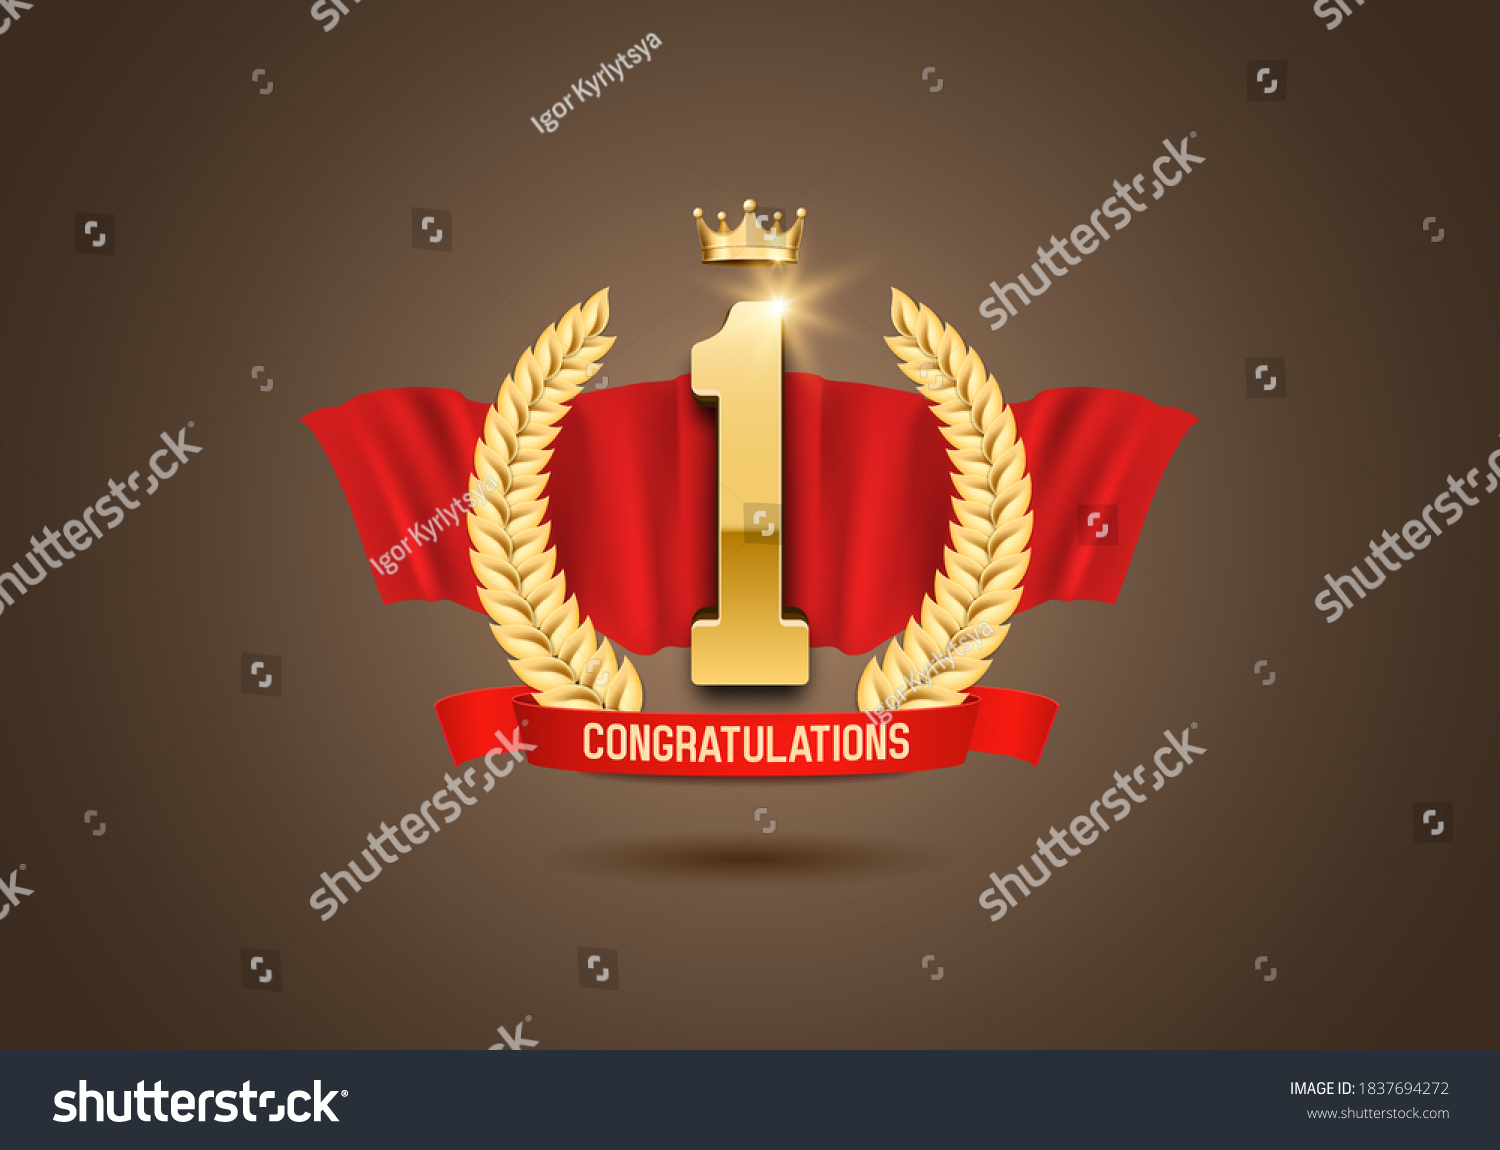 Winner award. Number one. Golden laurel wreath with crown and red ribbon. Vector illustration. #1837694272